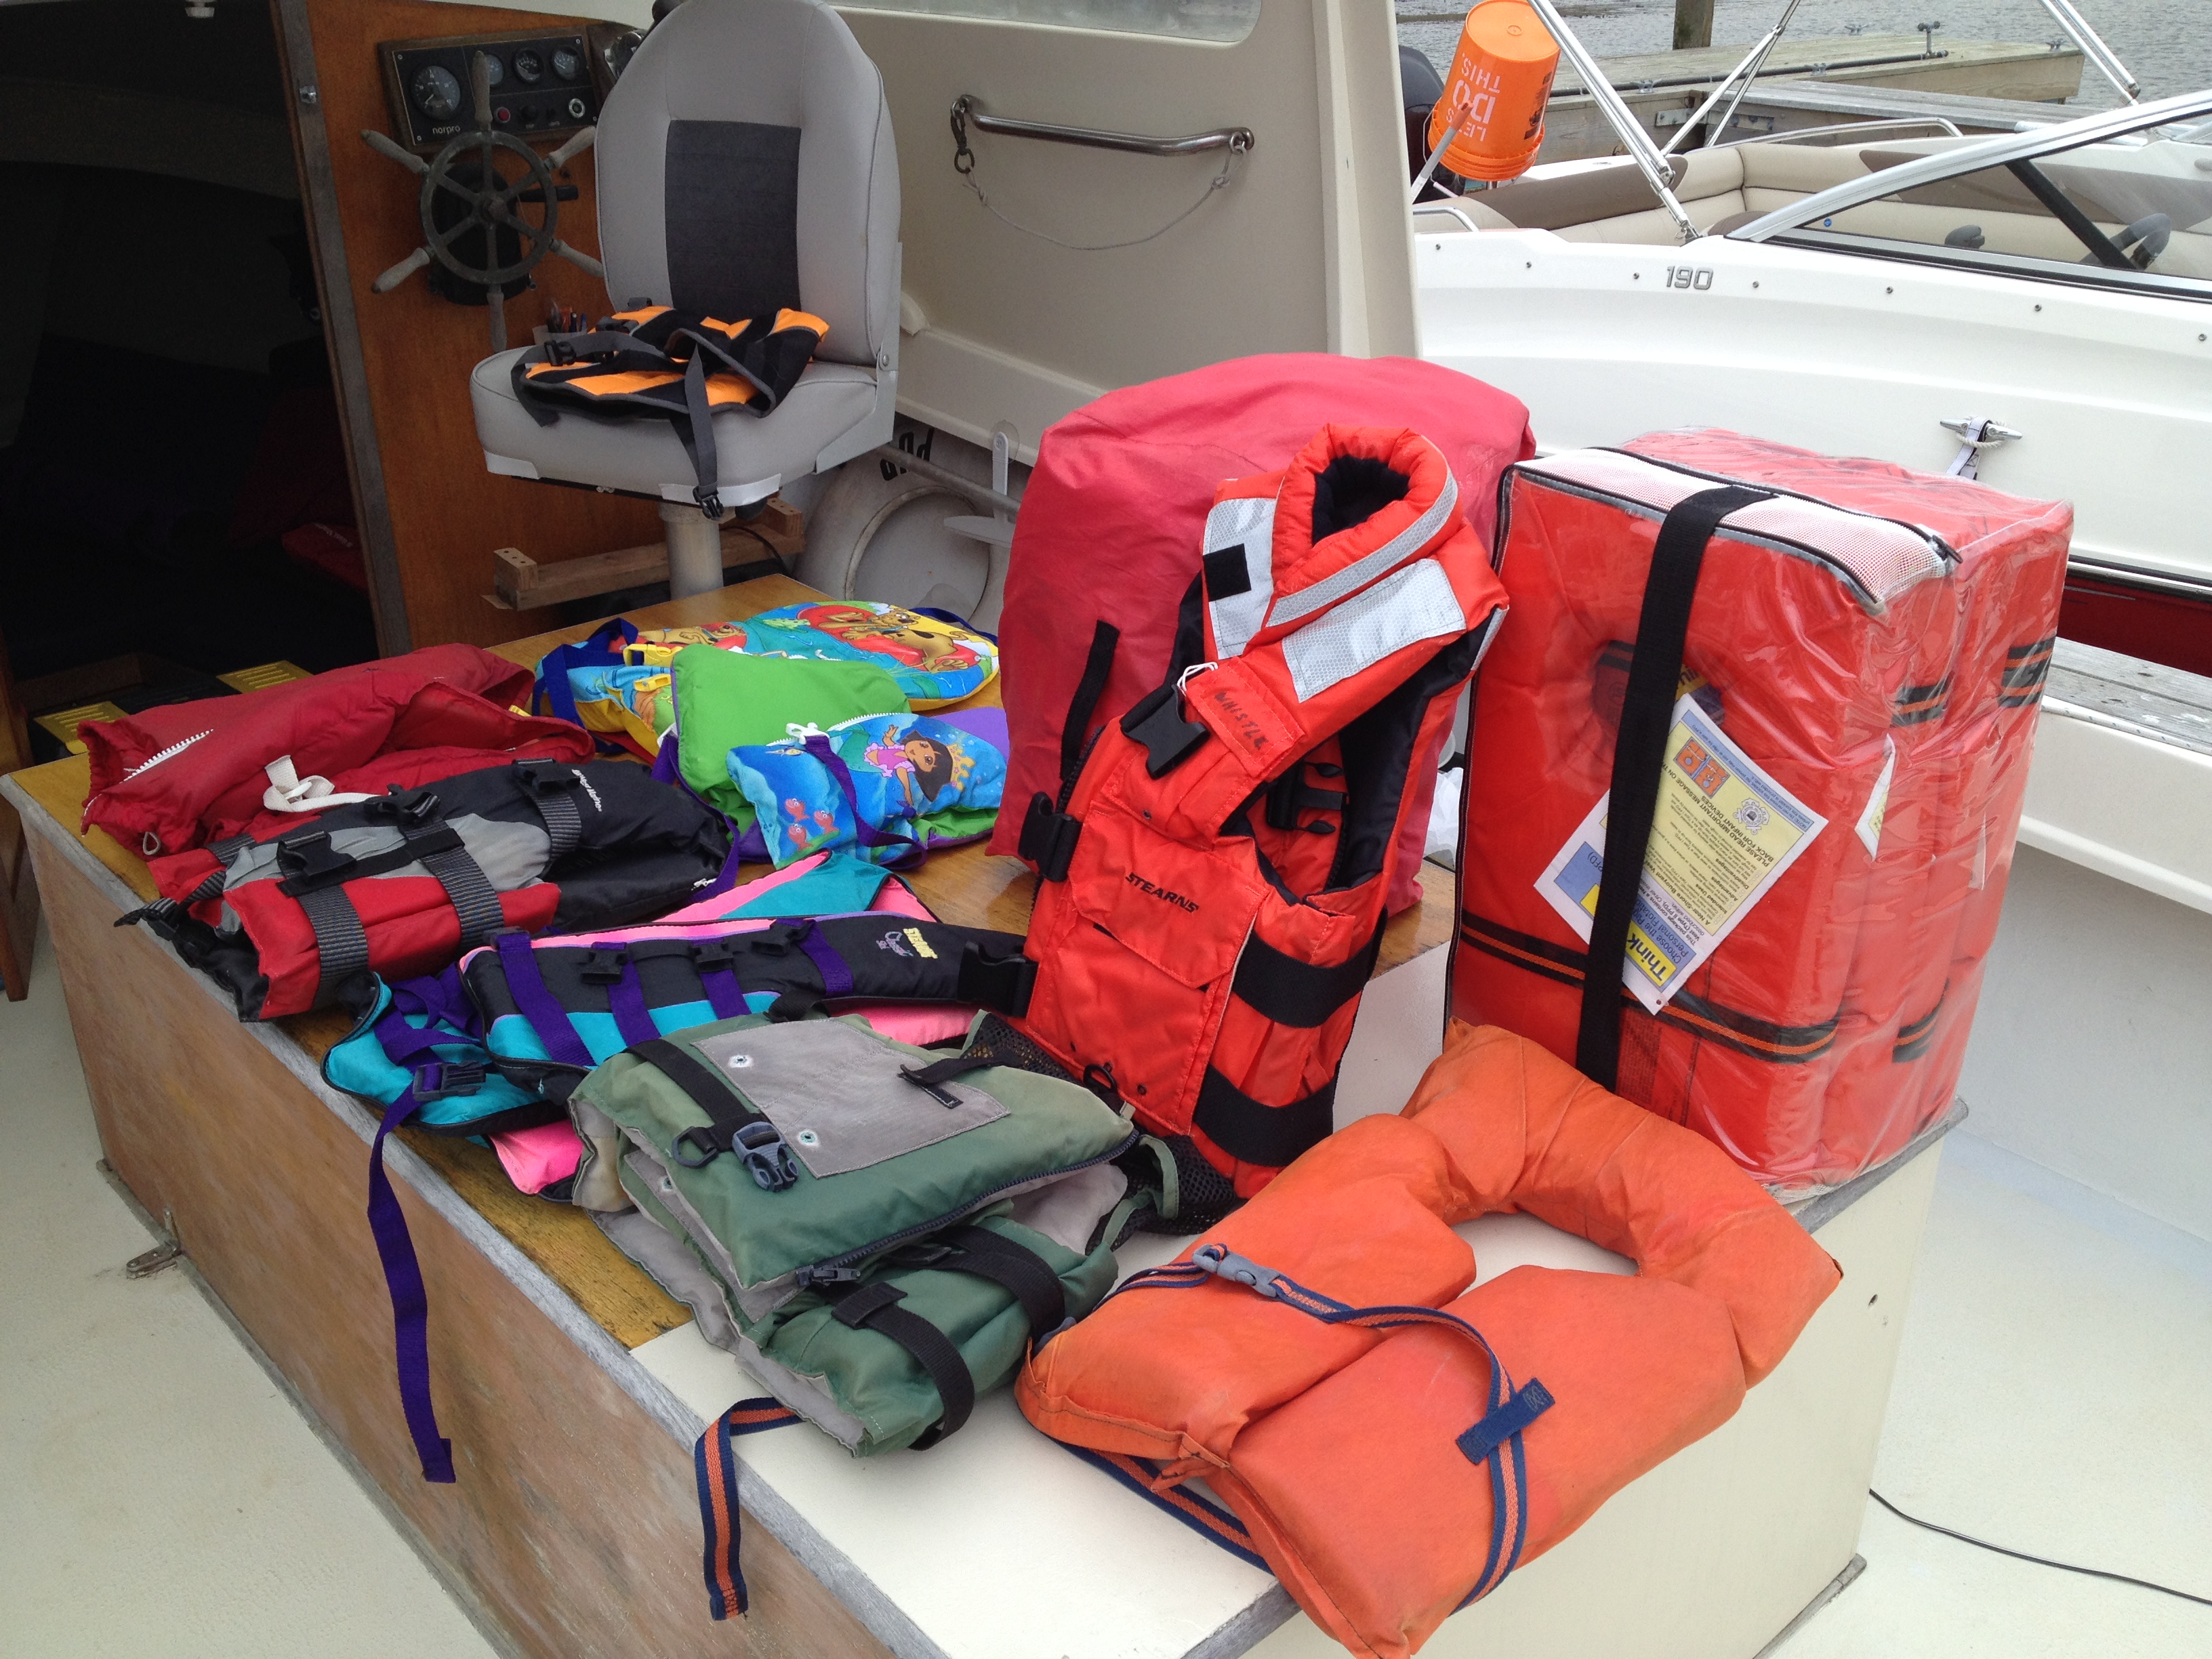 This boat has an extra-big inventory of PFDs, including several for visiting kids and infants, and even one for a dog. This could be noted in a seller’s ad copy.